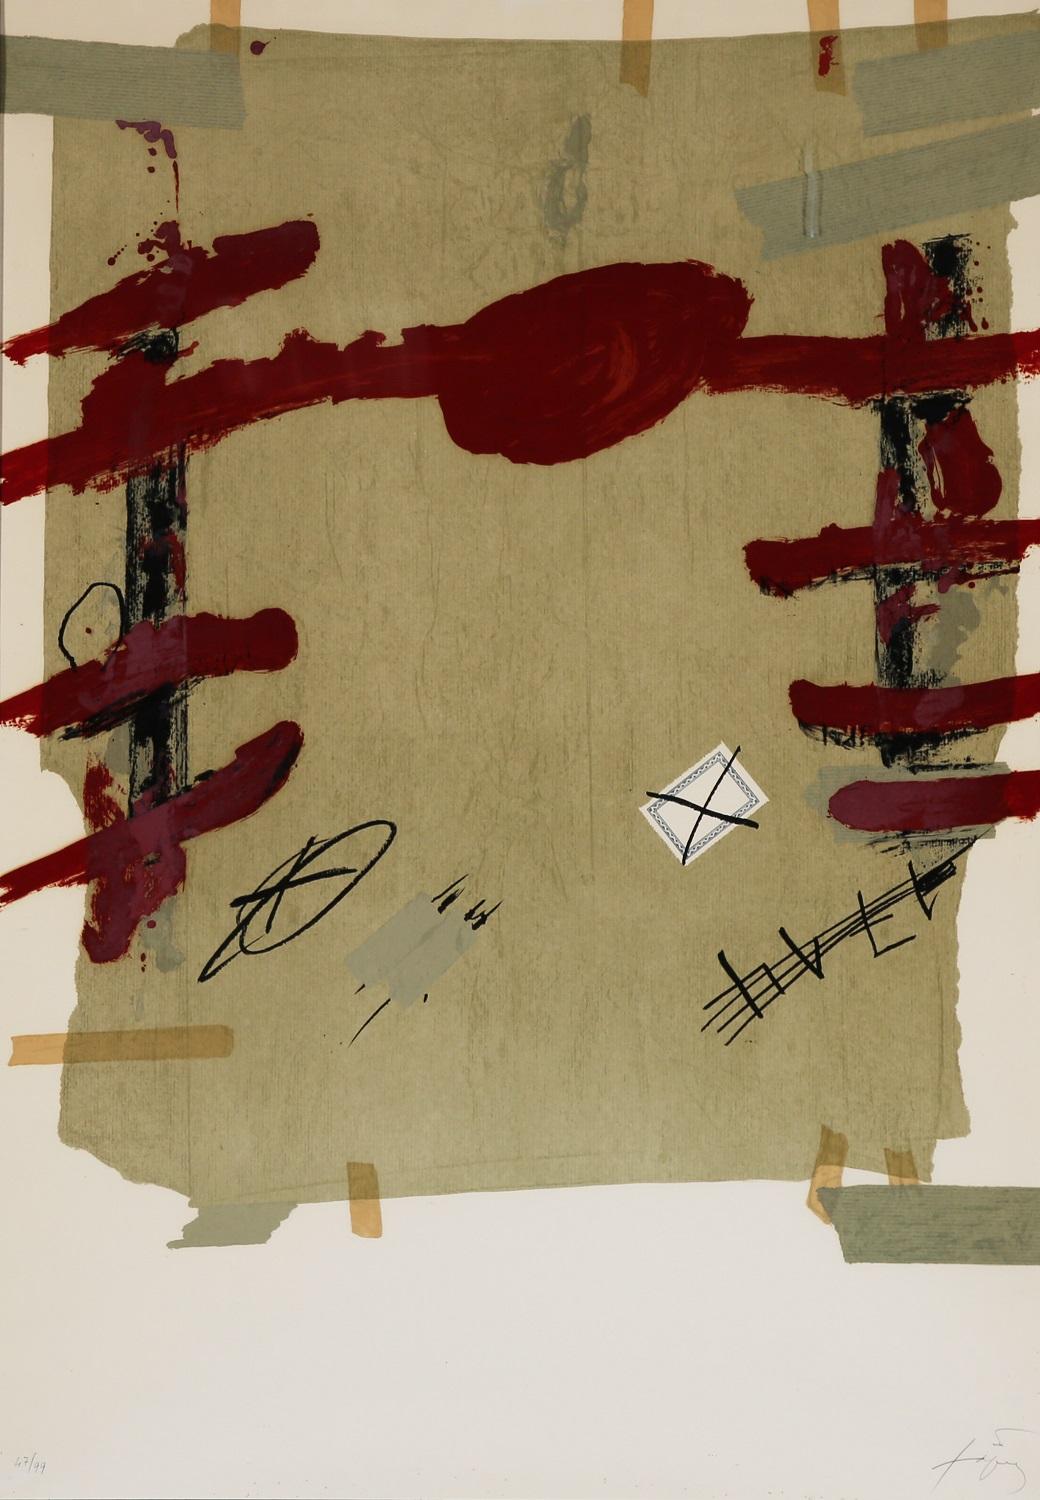 Catalonian Weeks Berlin Tapies Contemporary Meeting Abstract Red Grey Simbolism - Print by Antoni Tàpies